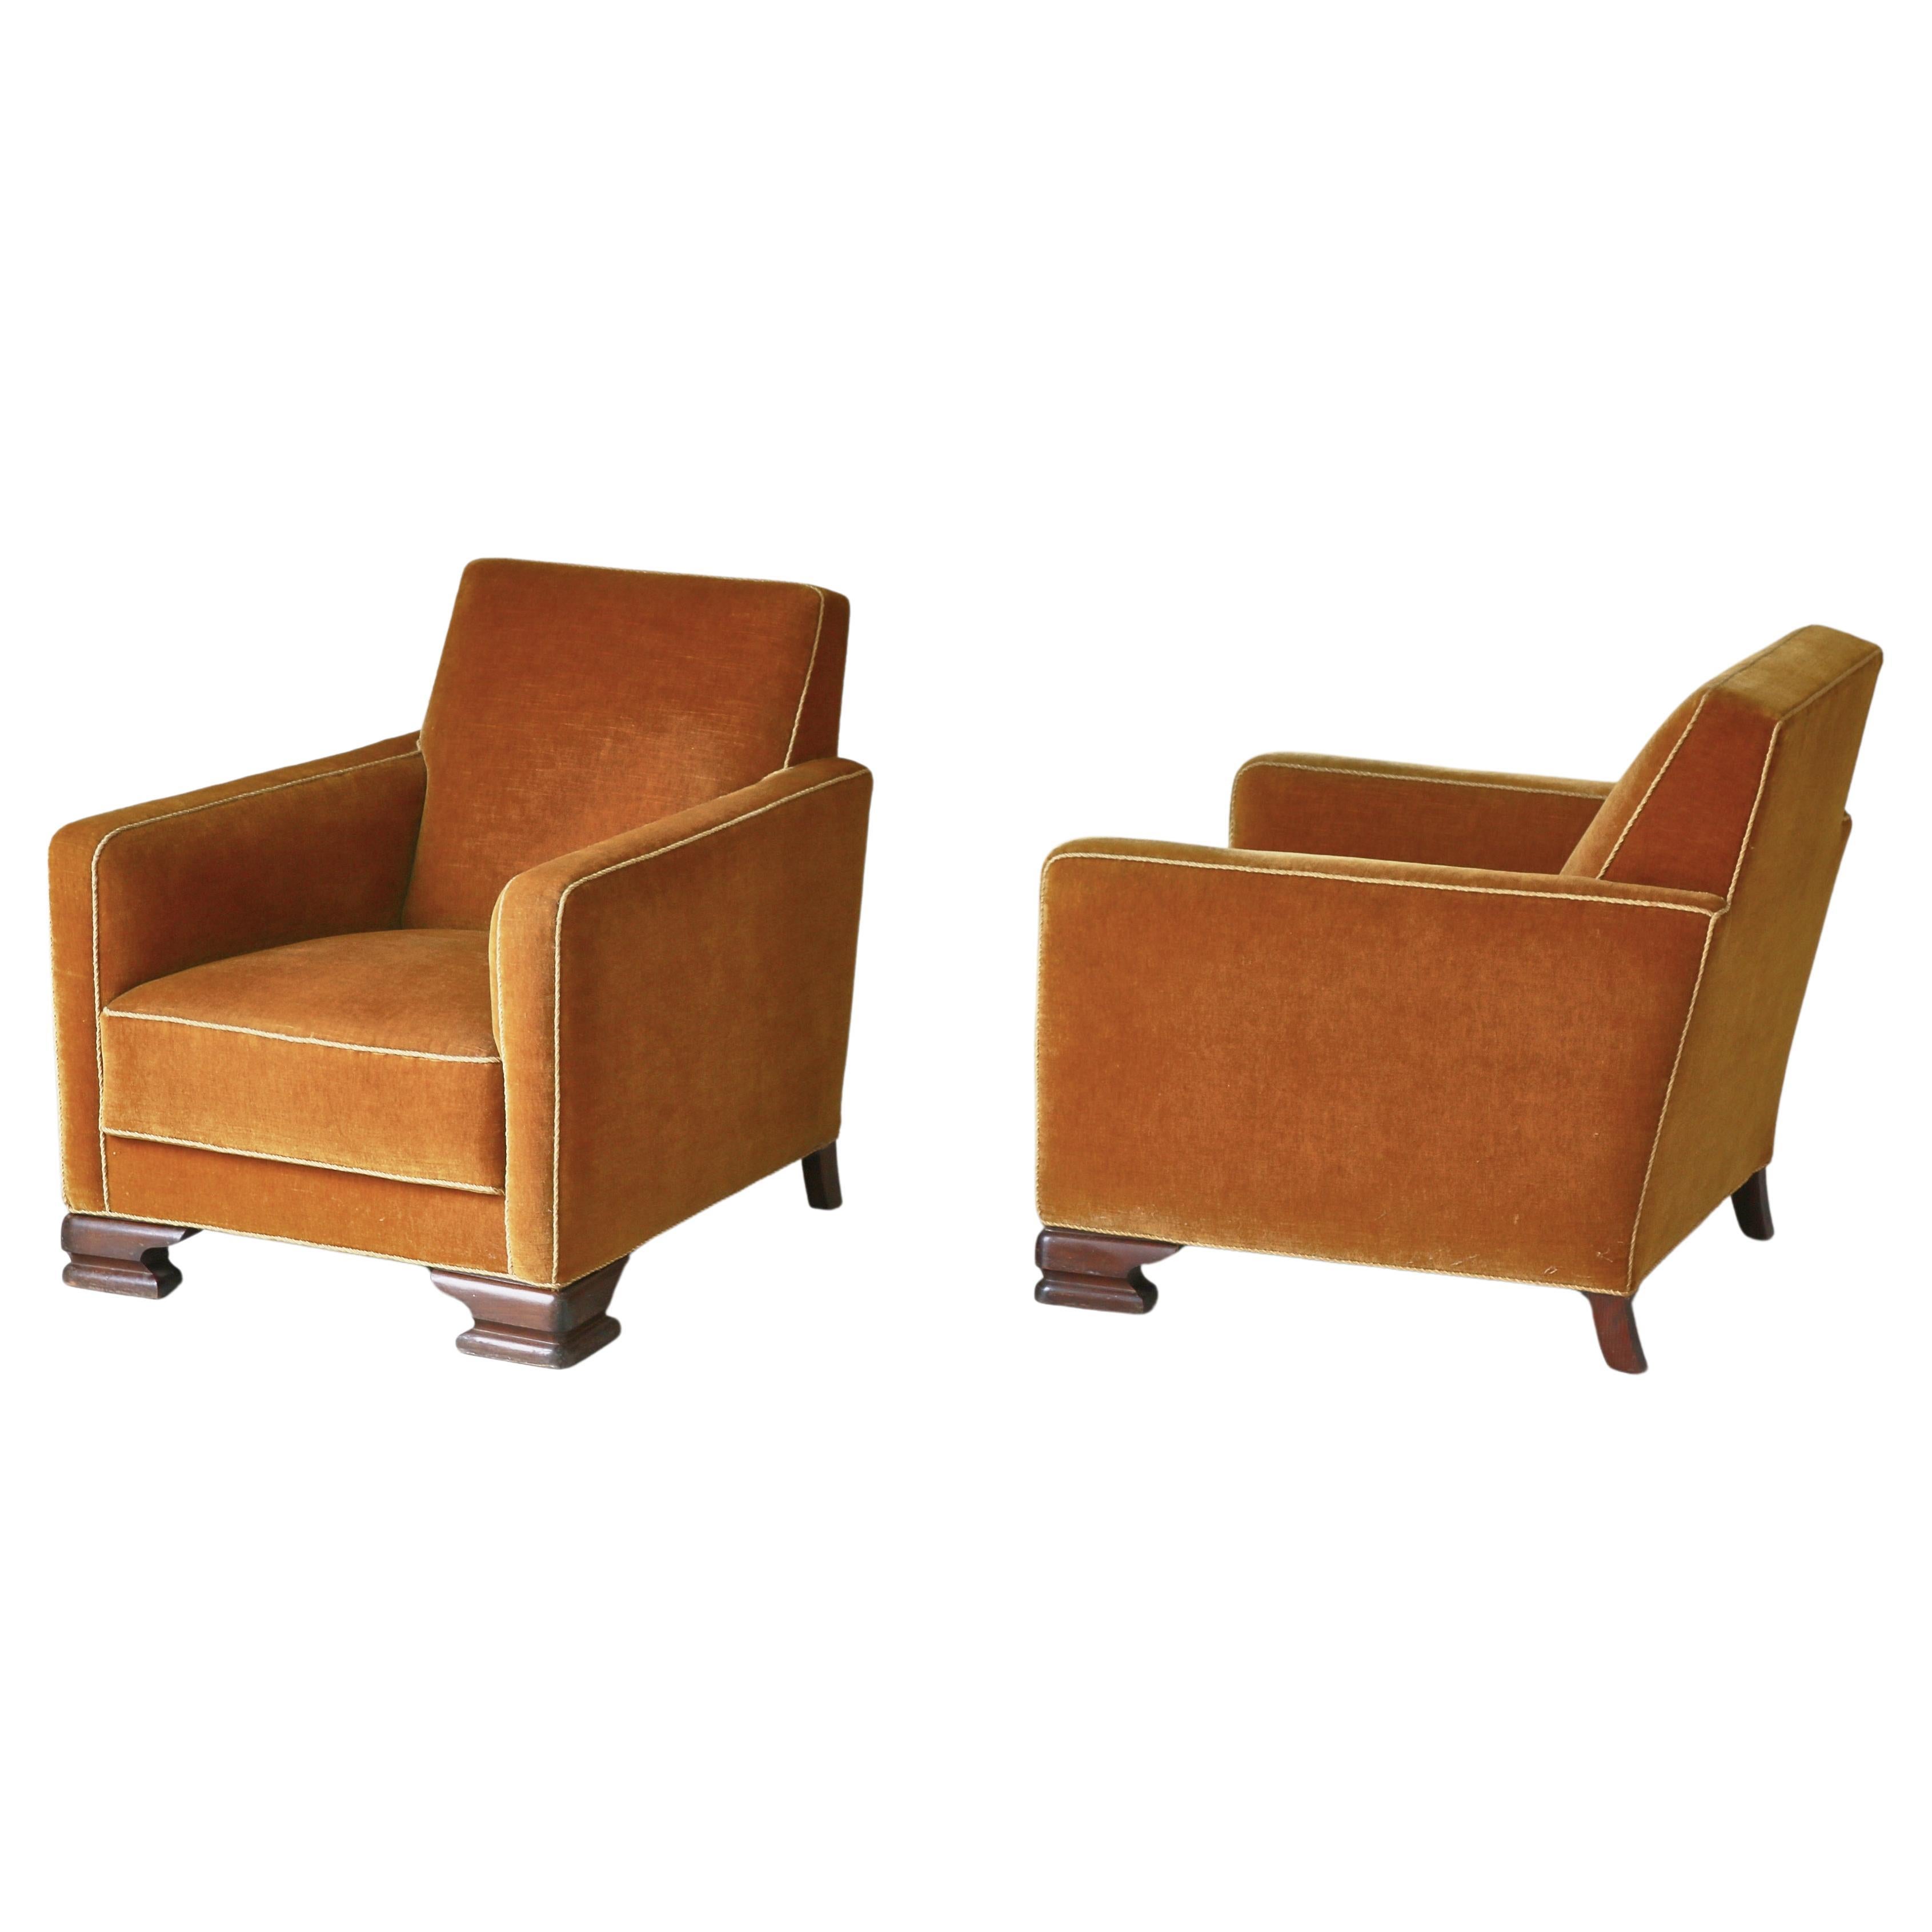 Pair of Danish Cabinetmaker Art Deco Lounge Chairs in Yellow Mohair, 1930s For Sale